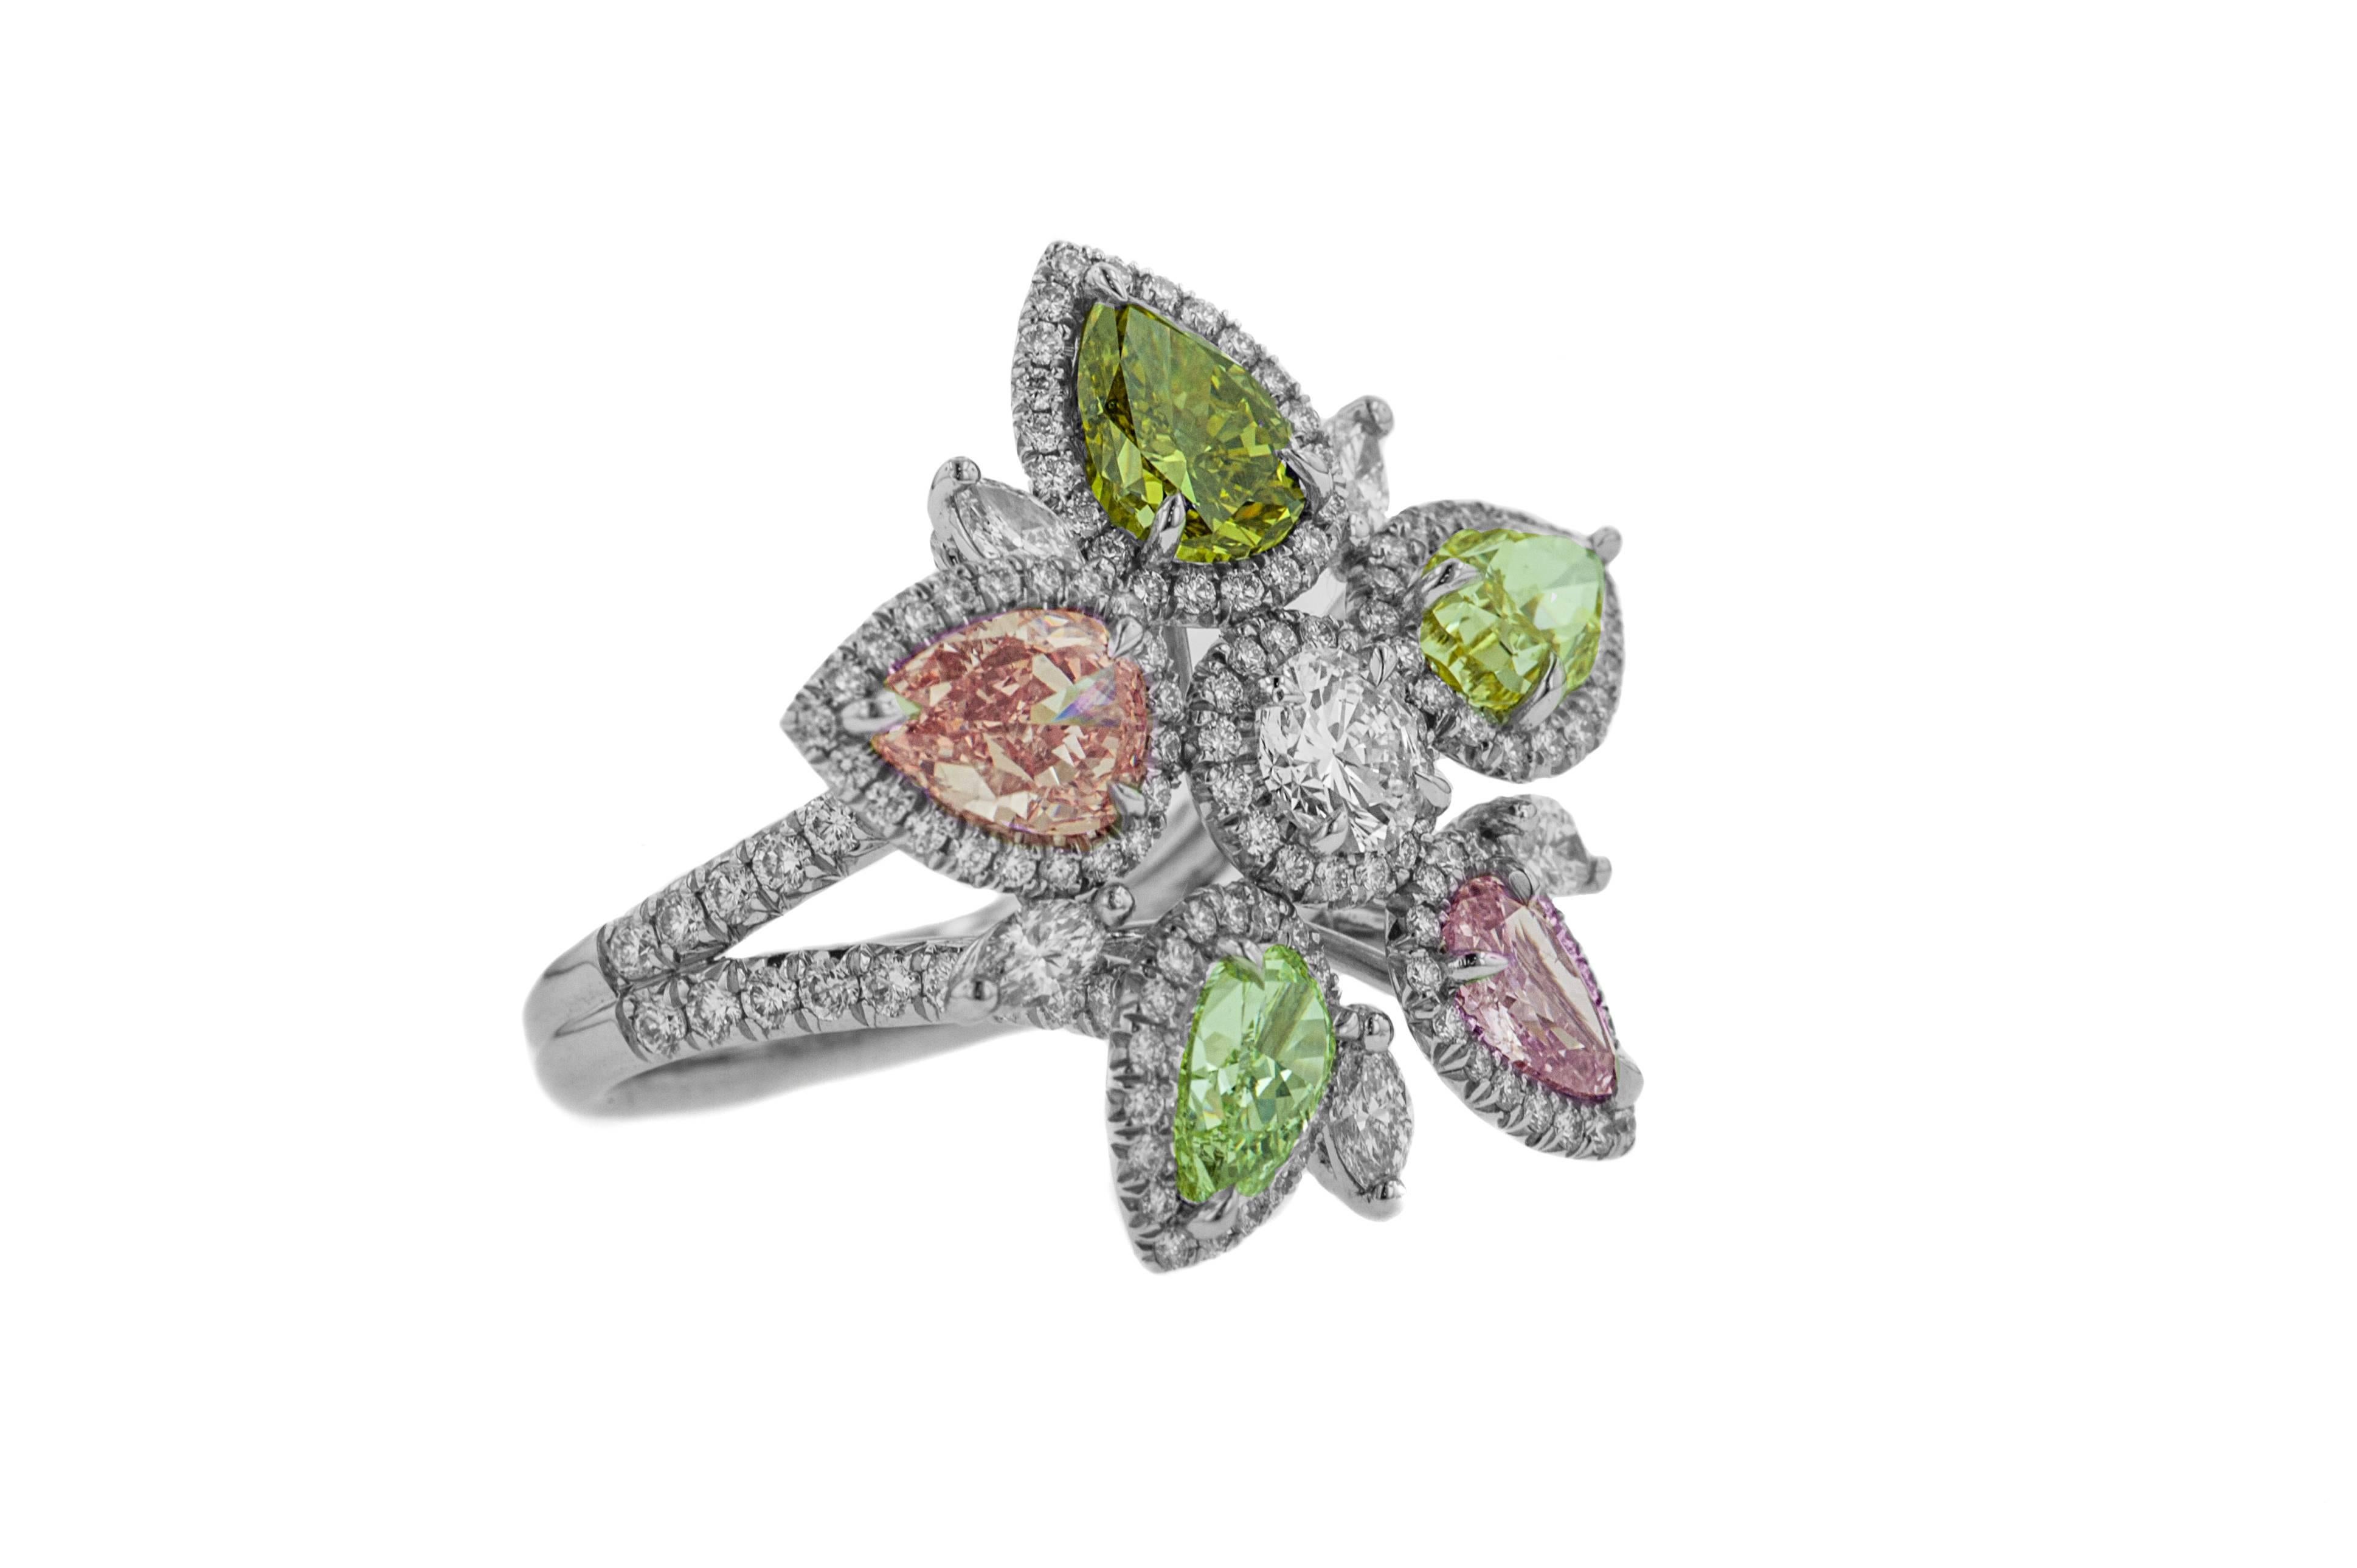 Magnificent Platinum GIA Certified Diamond flower ring.
Five Fancy color pear shapes are certified by GIA, totaling 4.62 Carats and 0.53 Carat F VS1 in the Center. 
This ring is designed by Diana M. using finest quality diamonds and material.